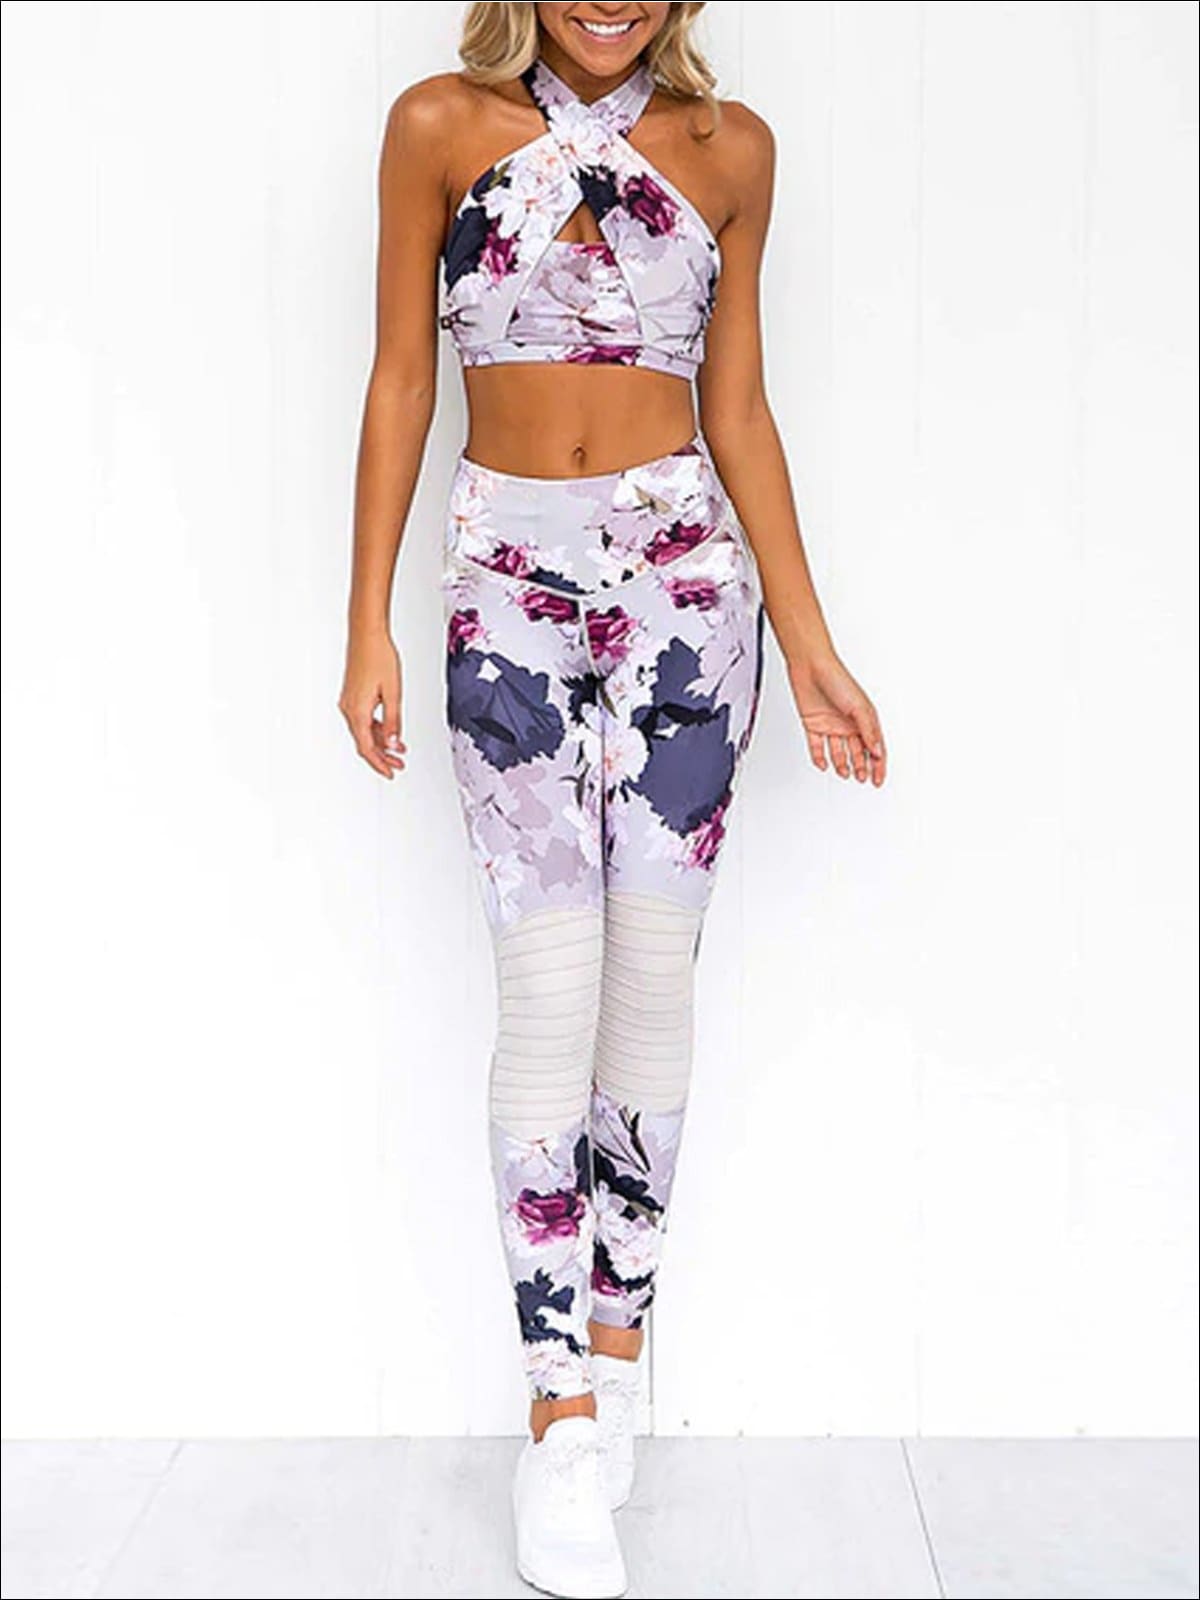 https://cdn.shopify.com/s/files/1/0996/1812/products/womens-quick-dry-floral-cross-front-crop-to-leggings-set-s-white-20-39-99-40-59-bfcutoff-dropified-dropshipping-activewear-mia-belle-overseas-fulfillment-baby_273.jpg